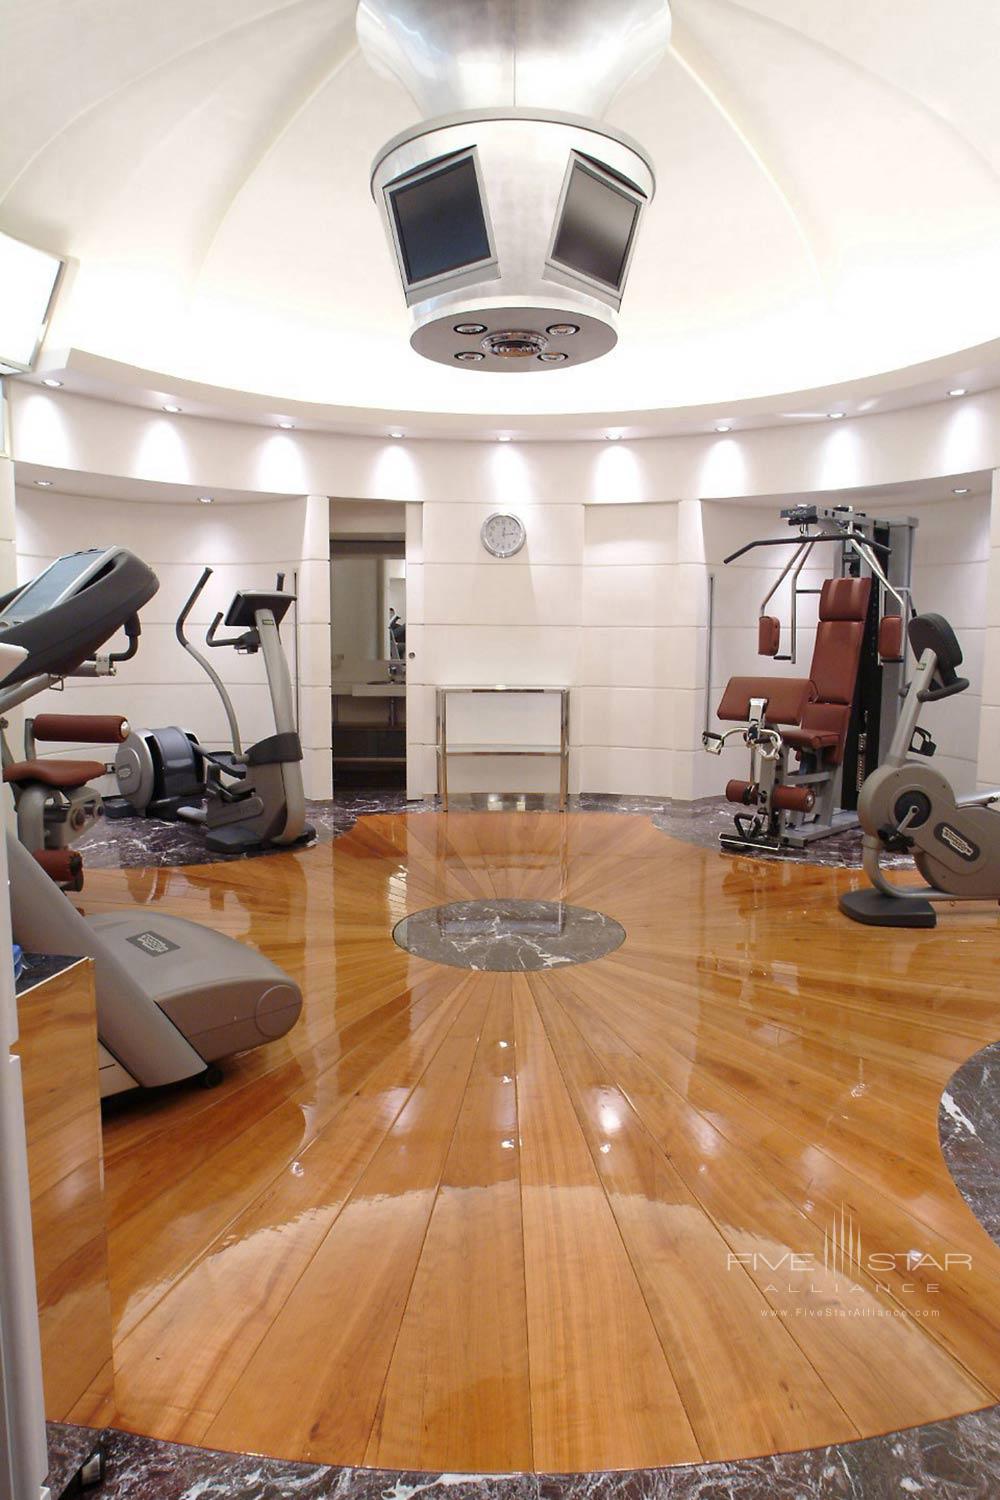 Fitness Center at Hotel Majestic Roma, Italy